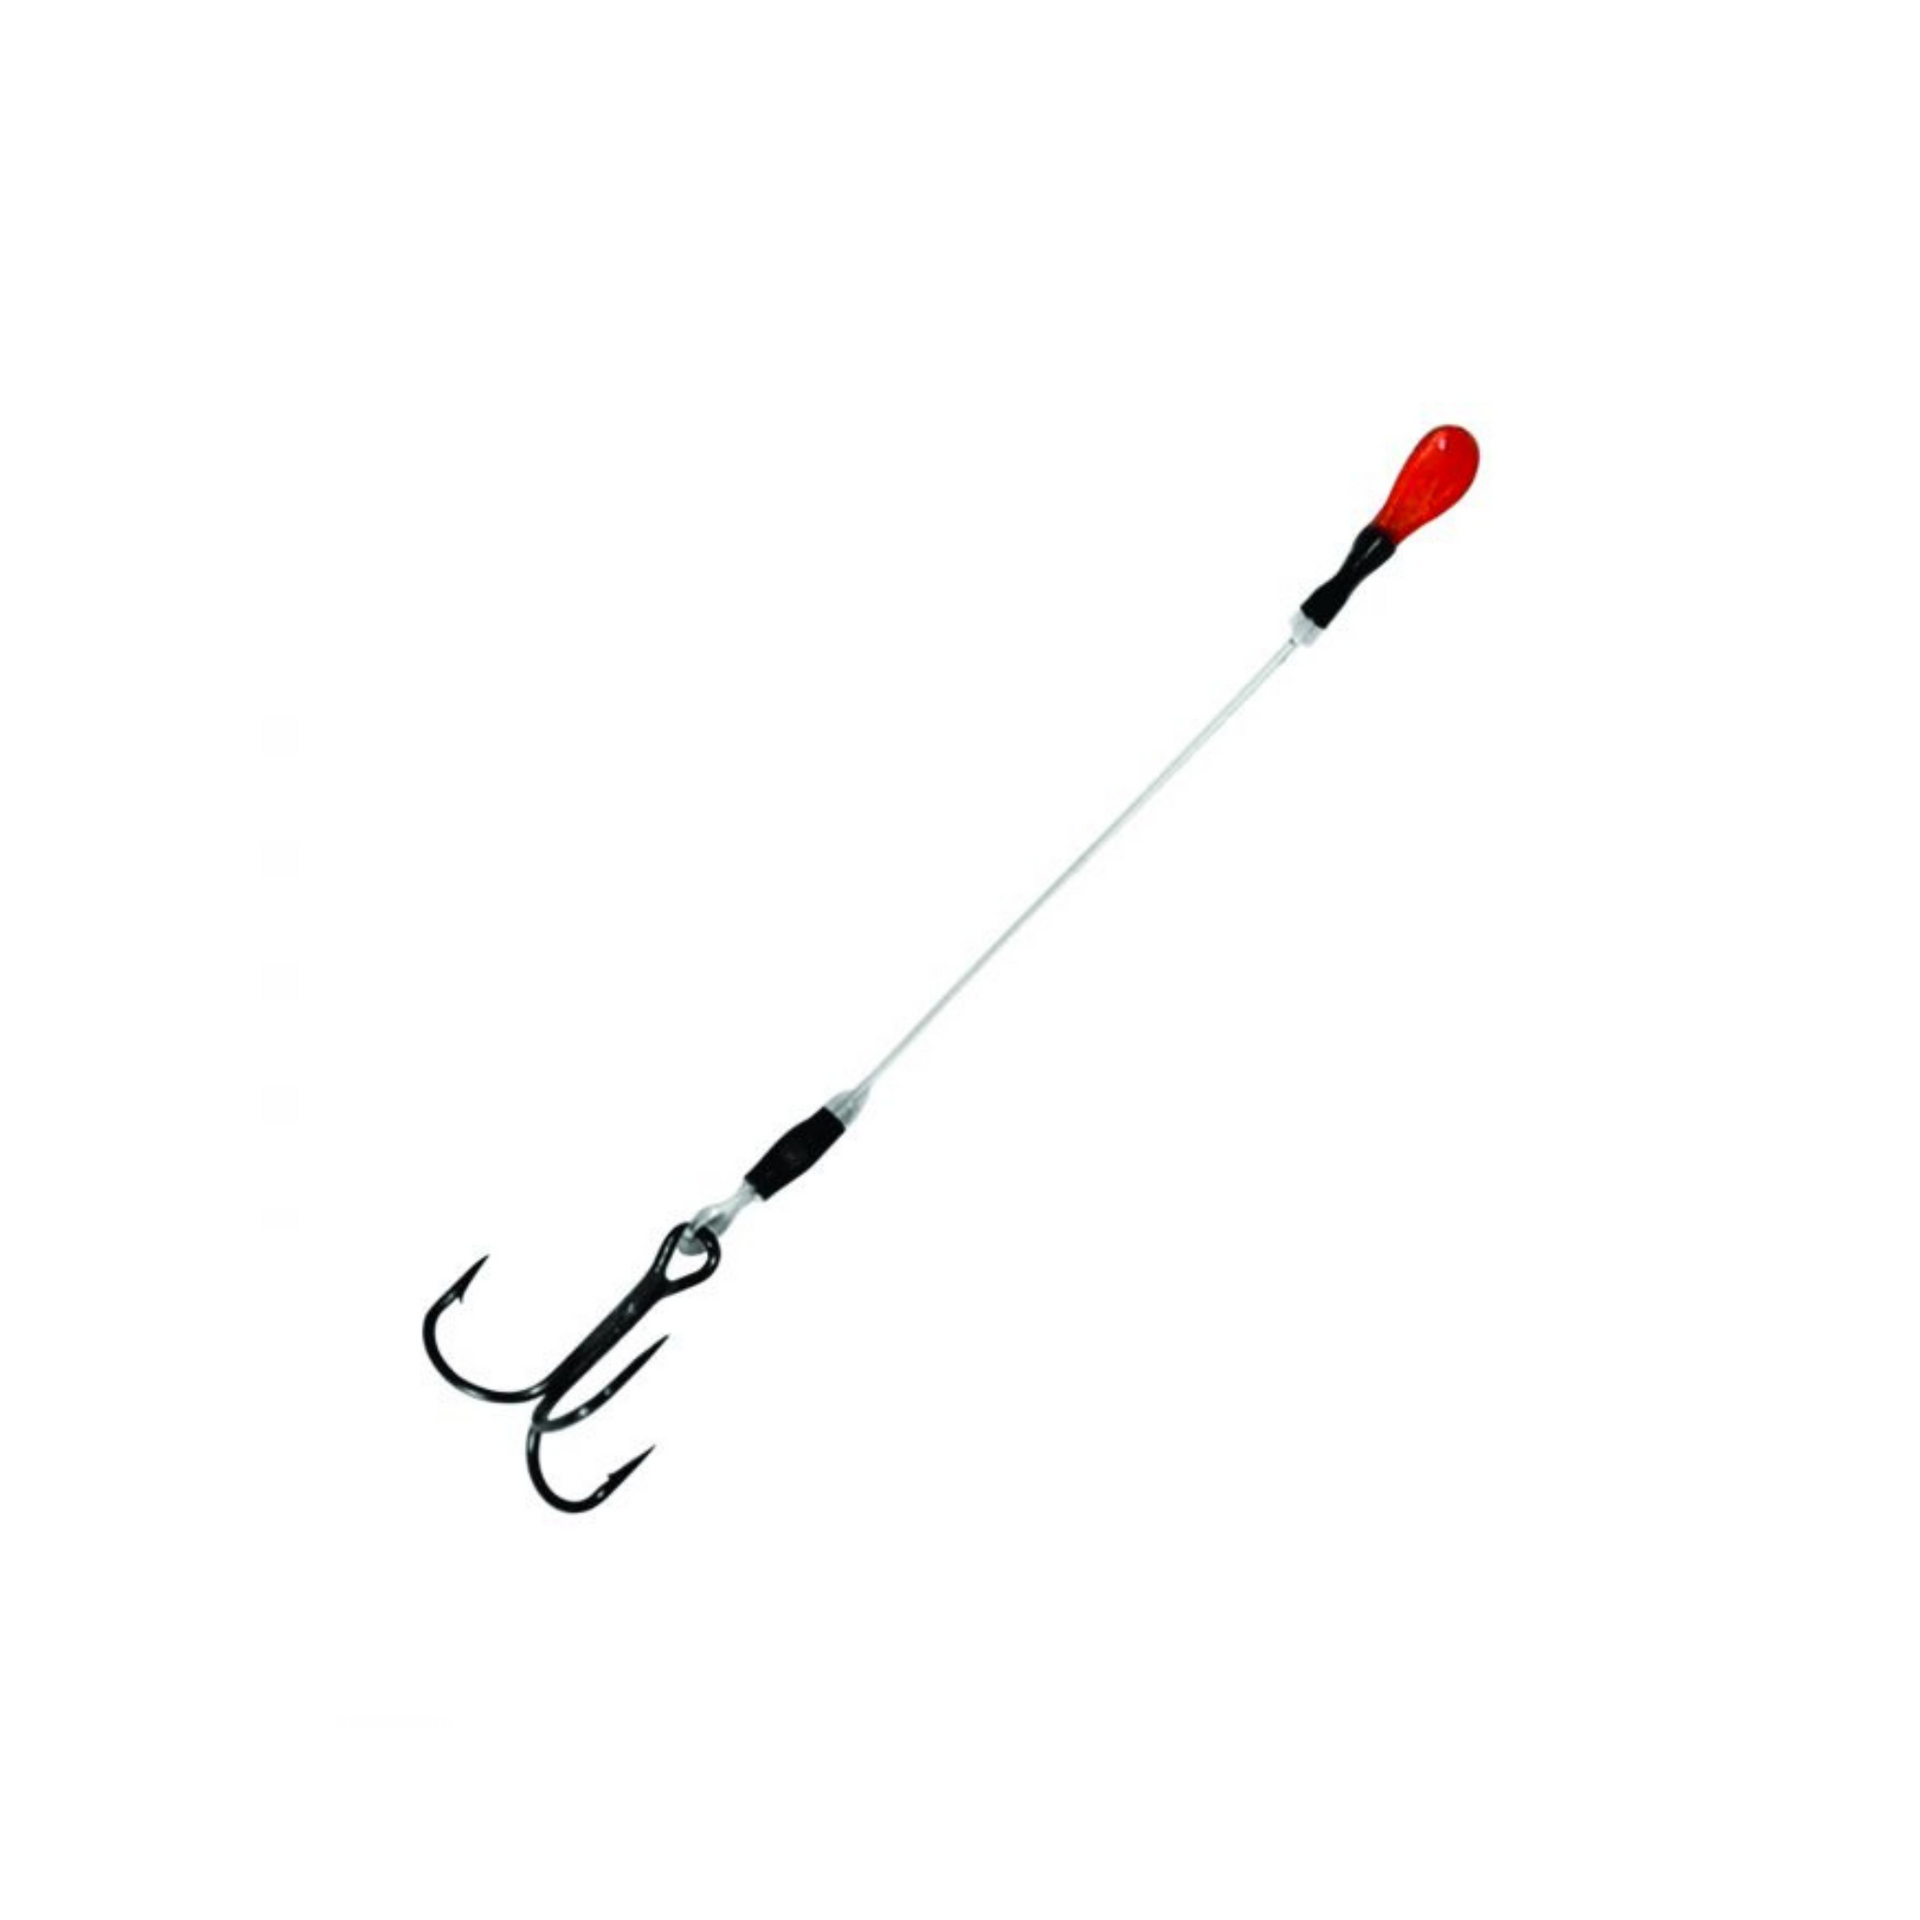 Eagle Claw Fishing Terminal Tackle for sale